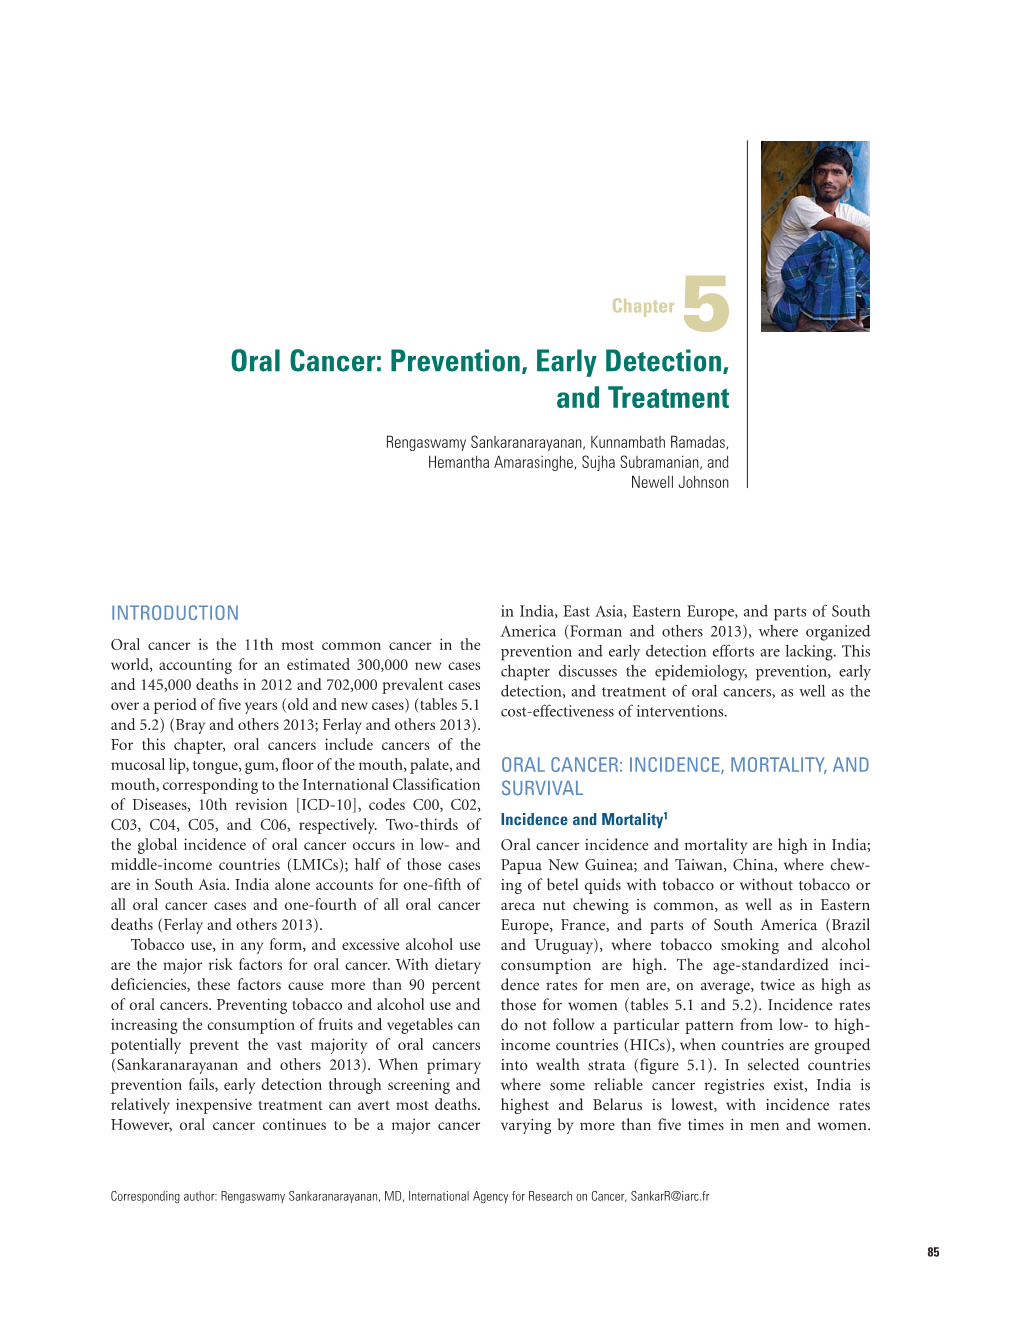 Oral Cancer: Prevention, Early Detection, and Treatment